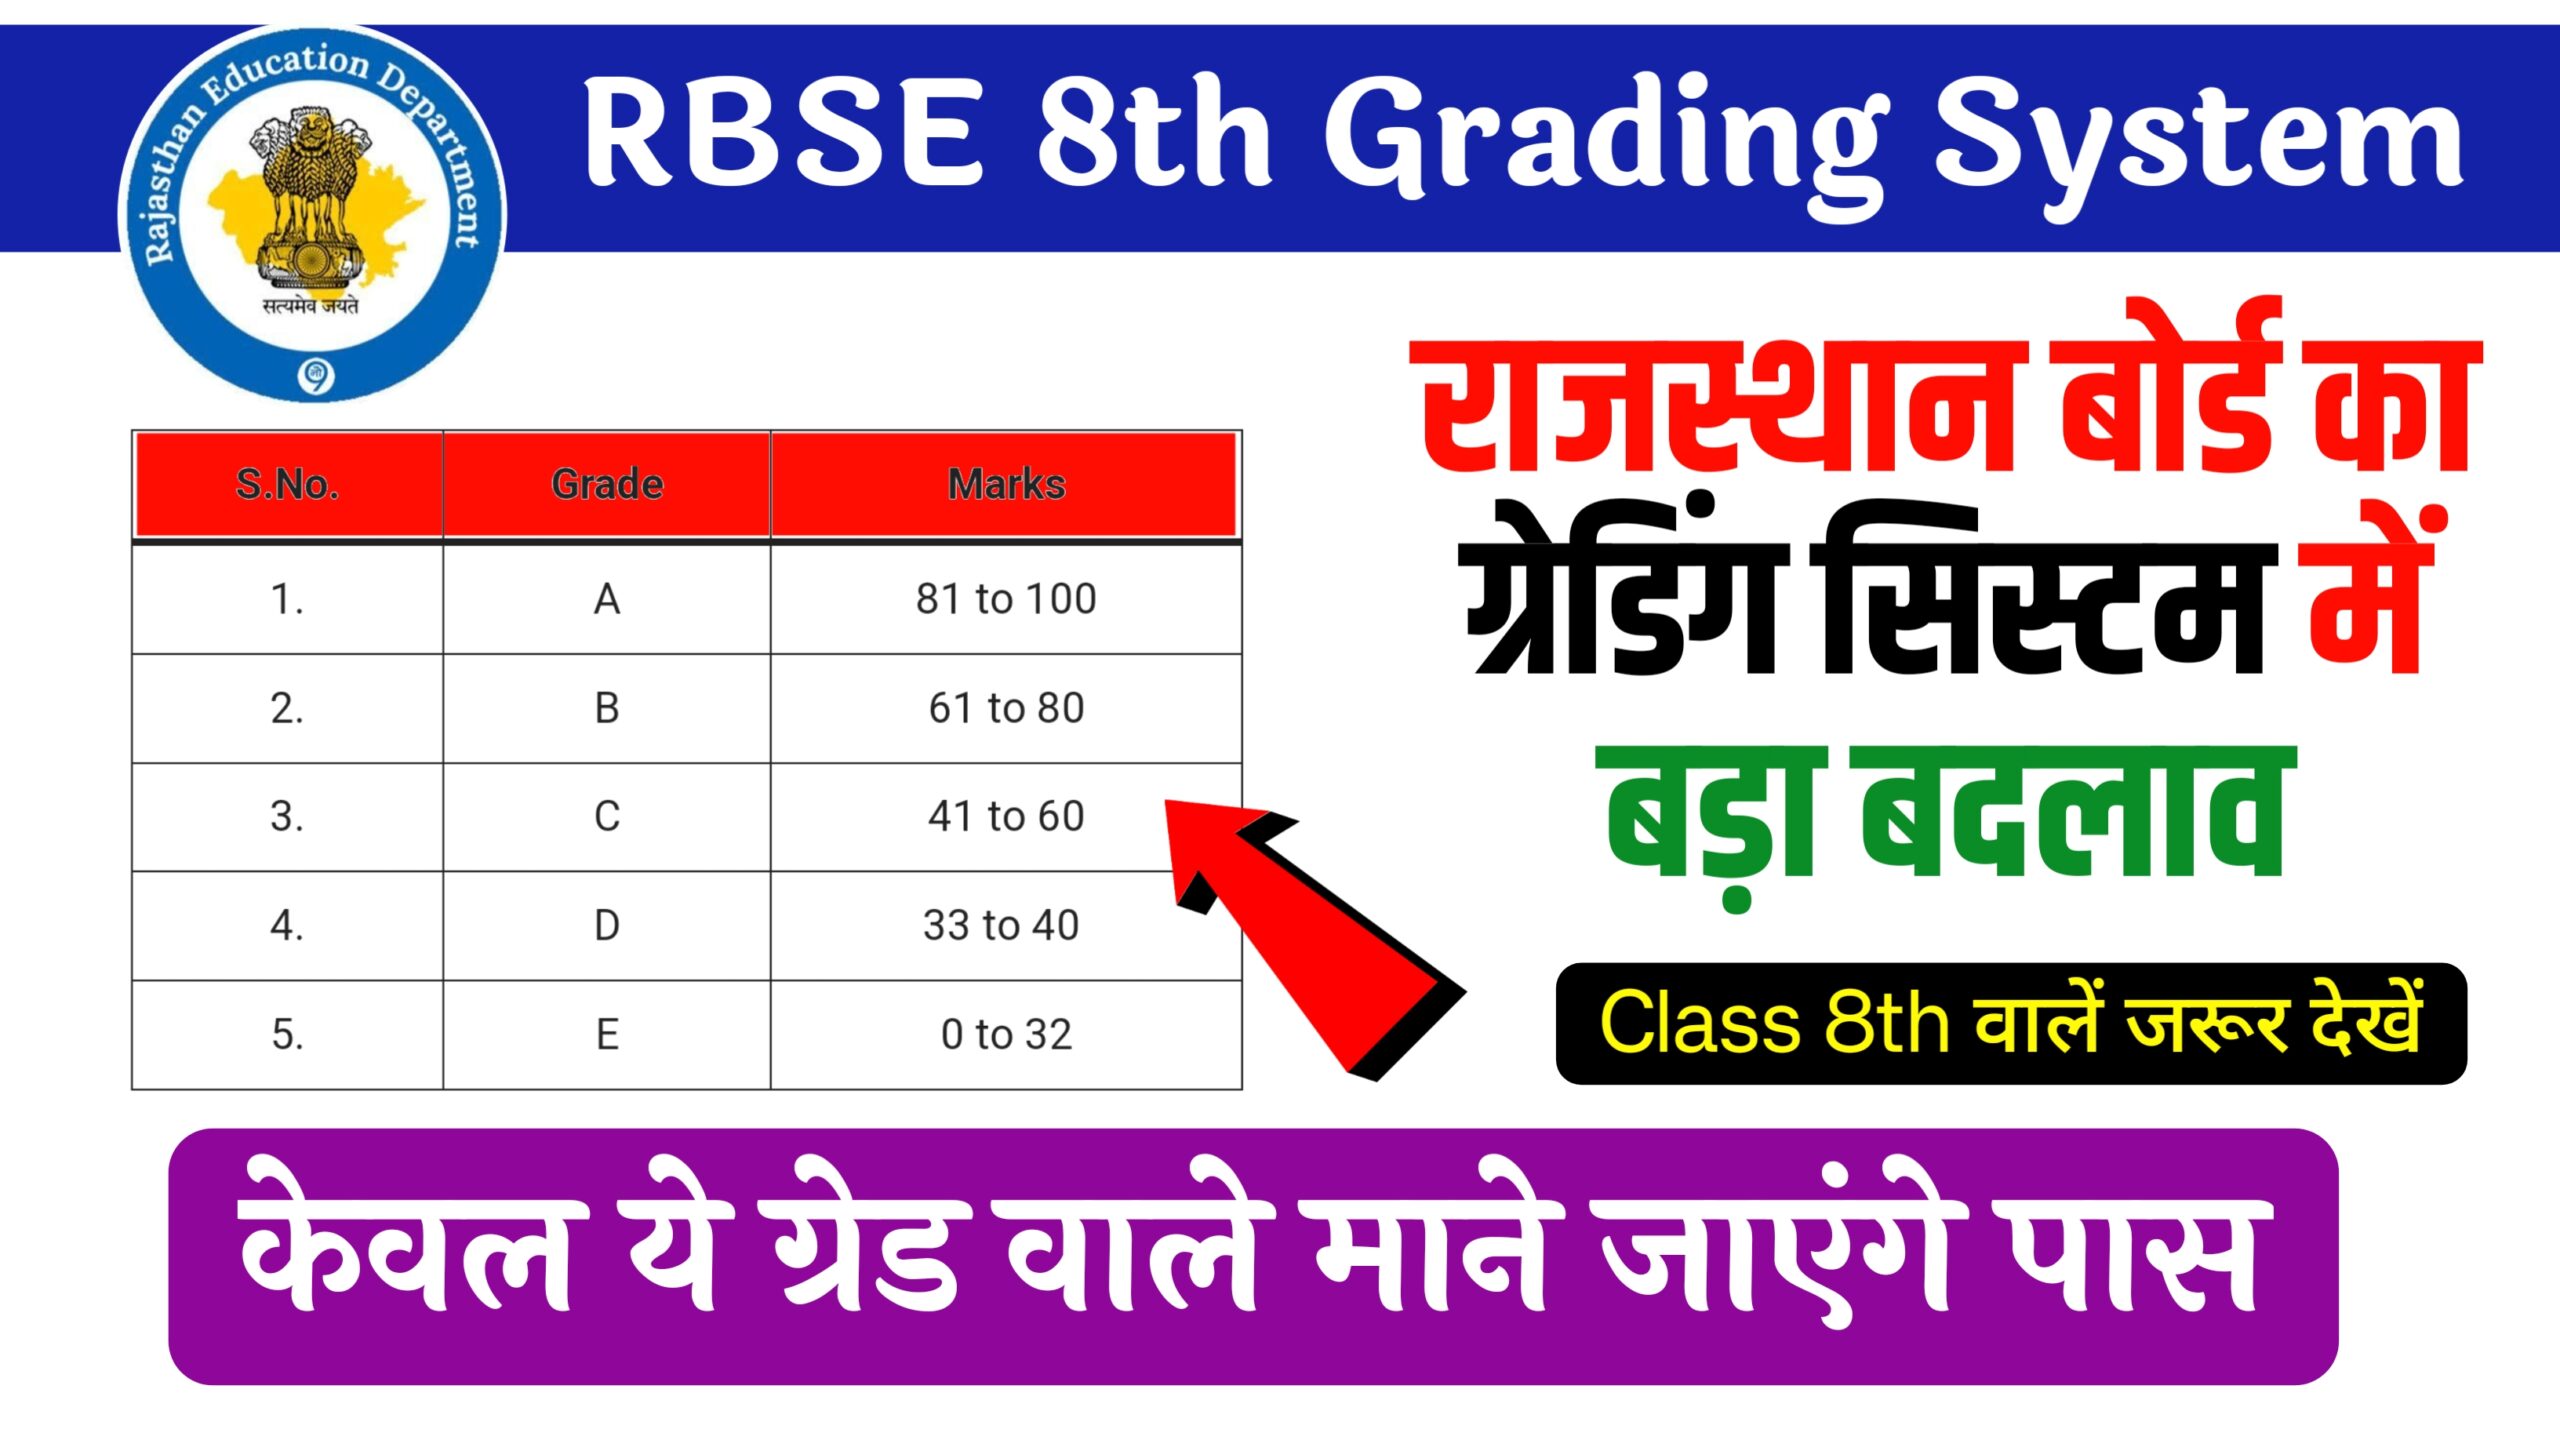 RBSE 8th Grading System